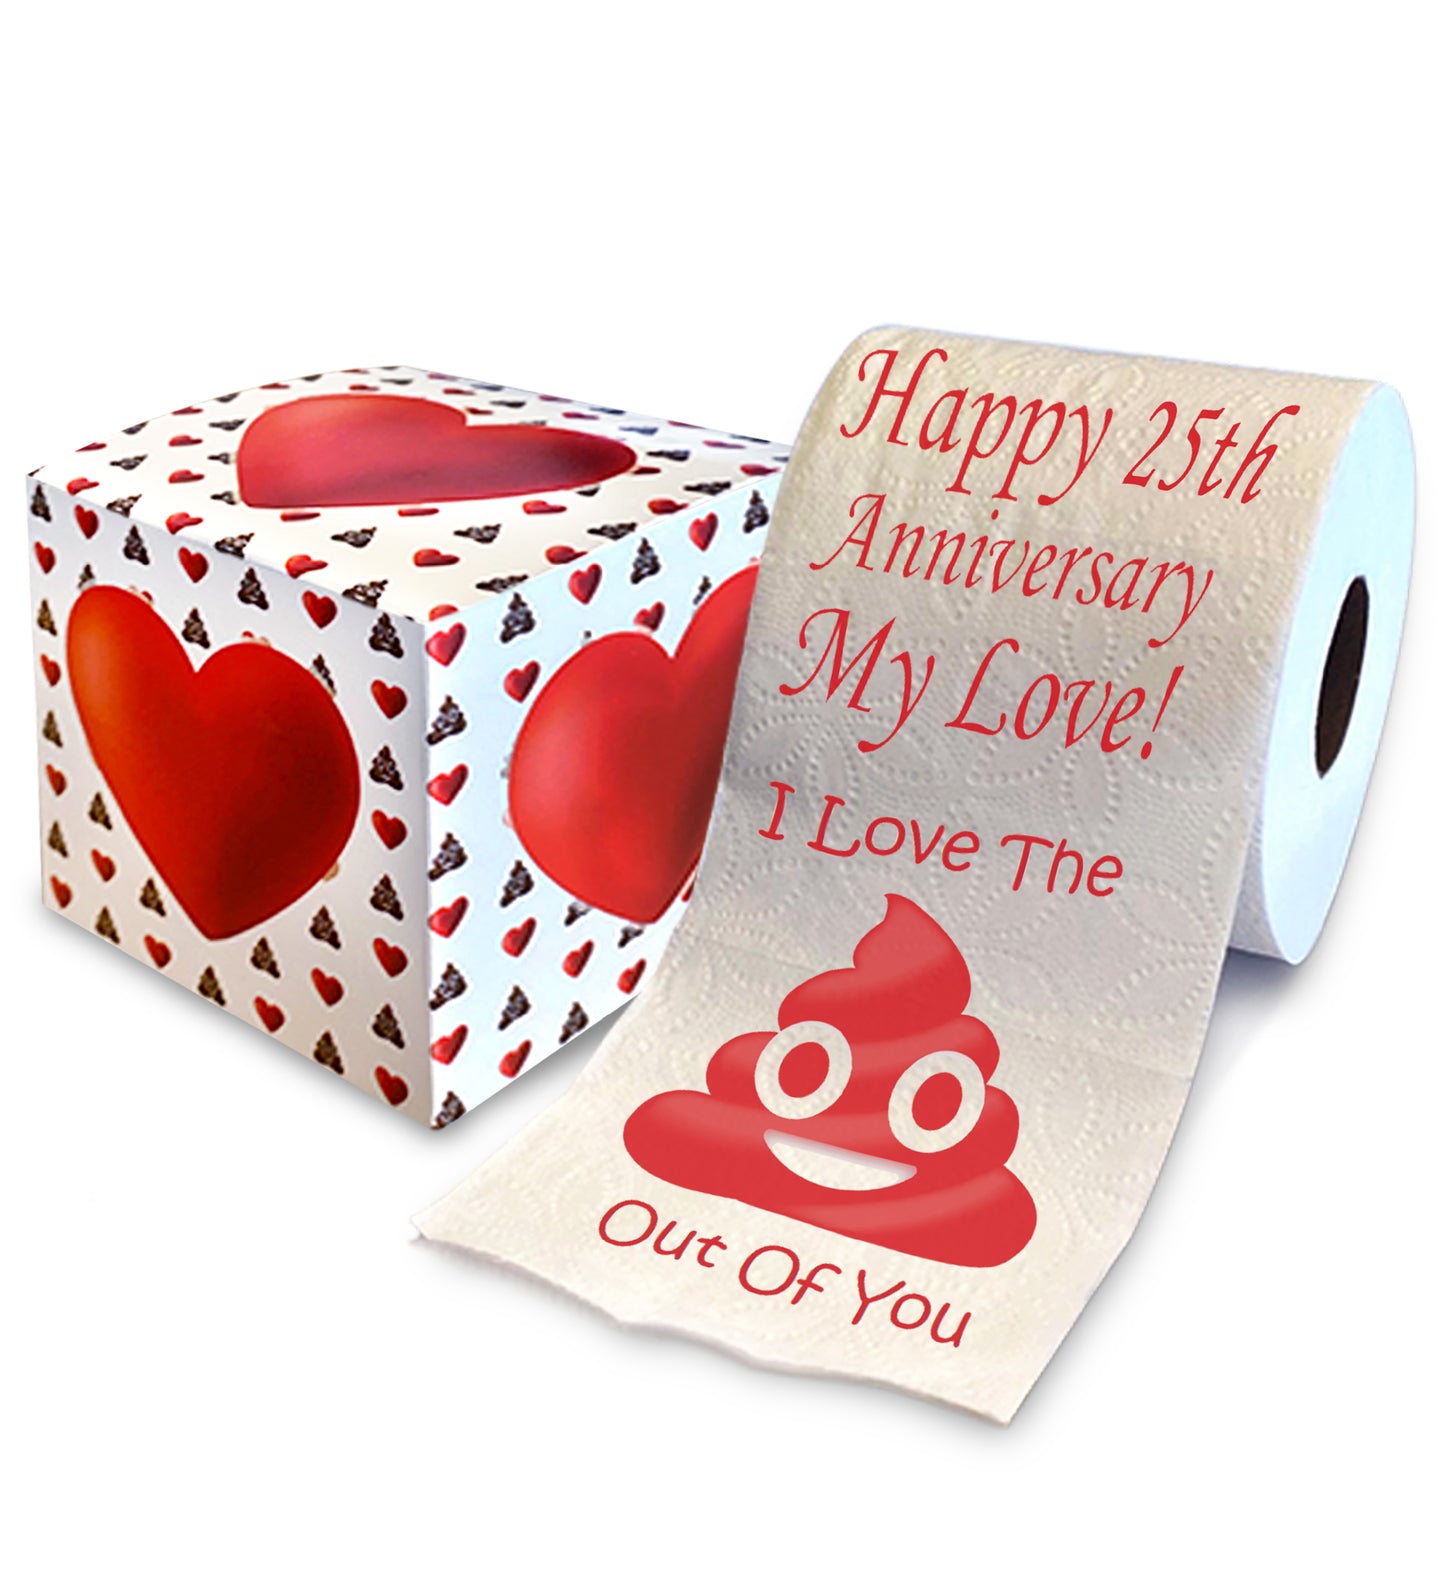 Printed TP Happy Twenty Fifth Anniversary Printed Toilet Paper Gift, 500 Sheets